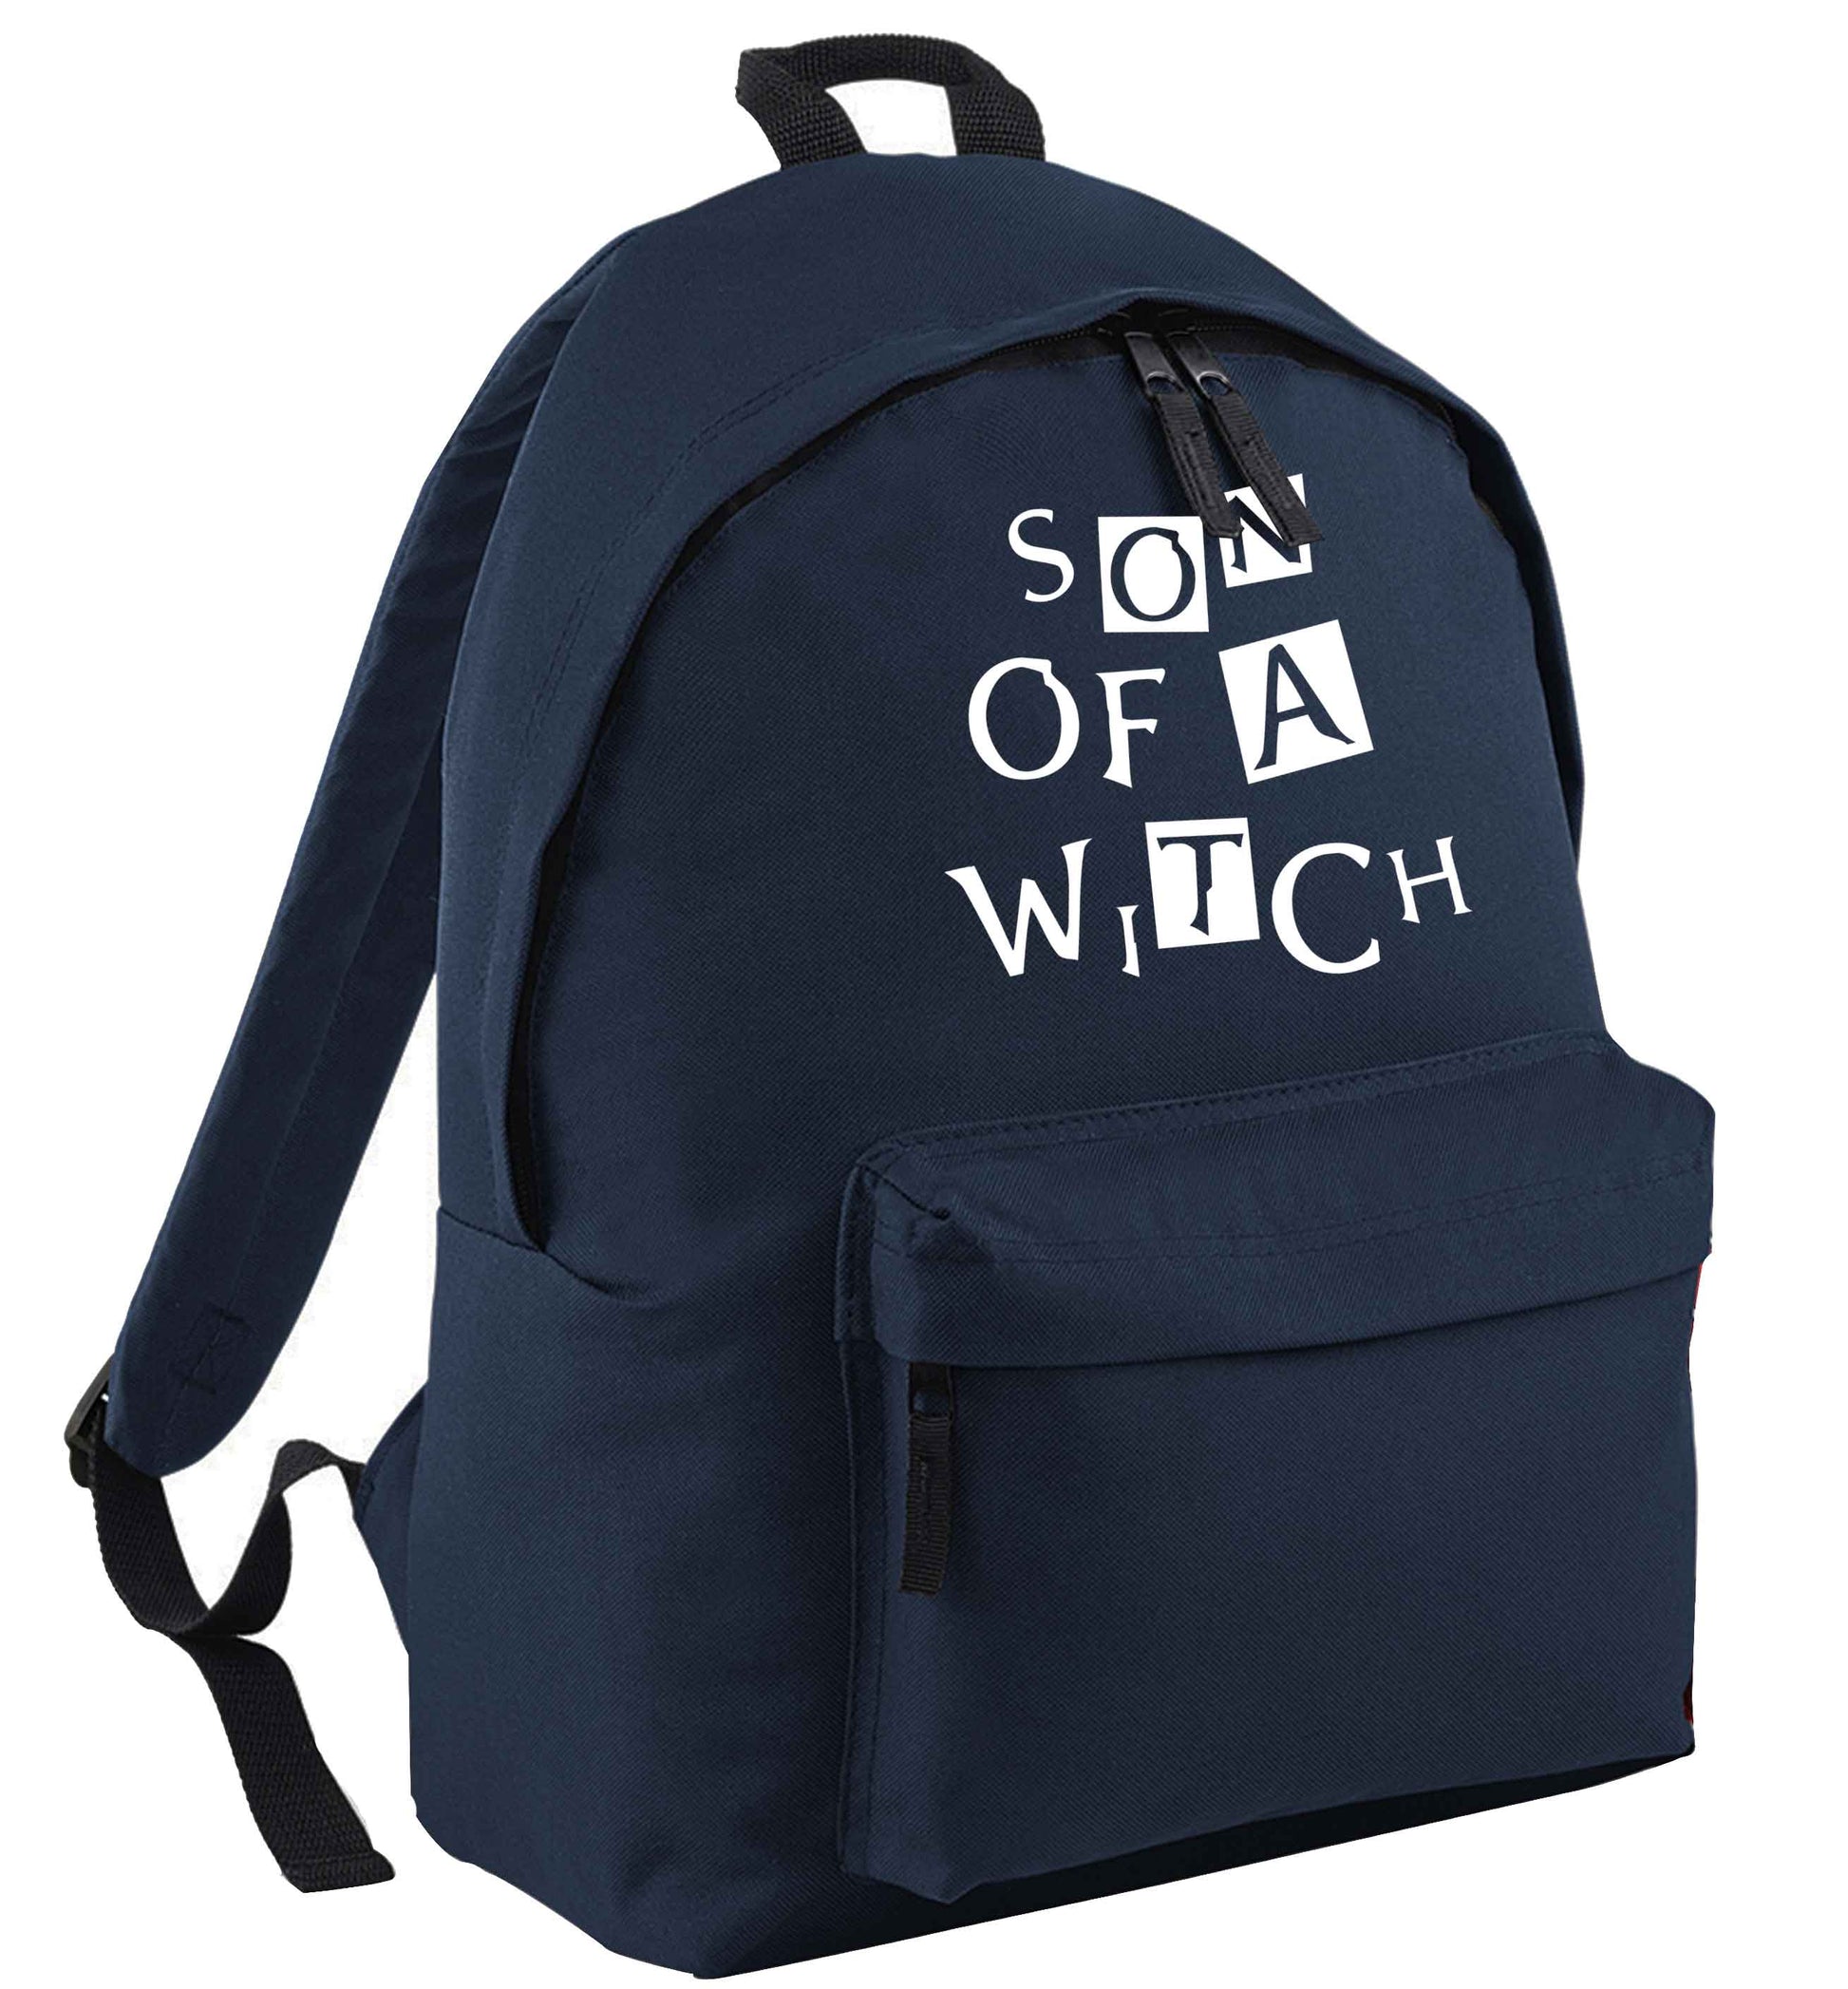 Son of a witch navy adults backpack